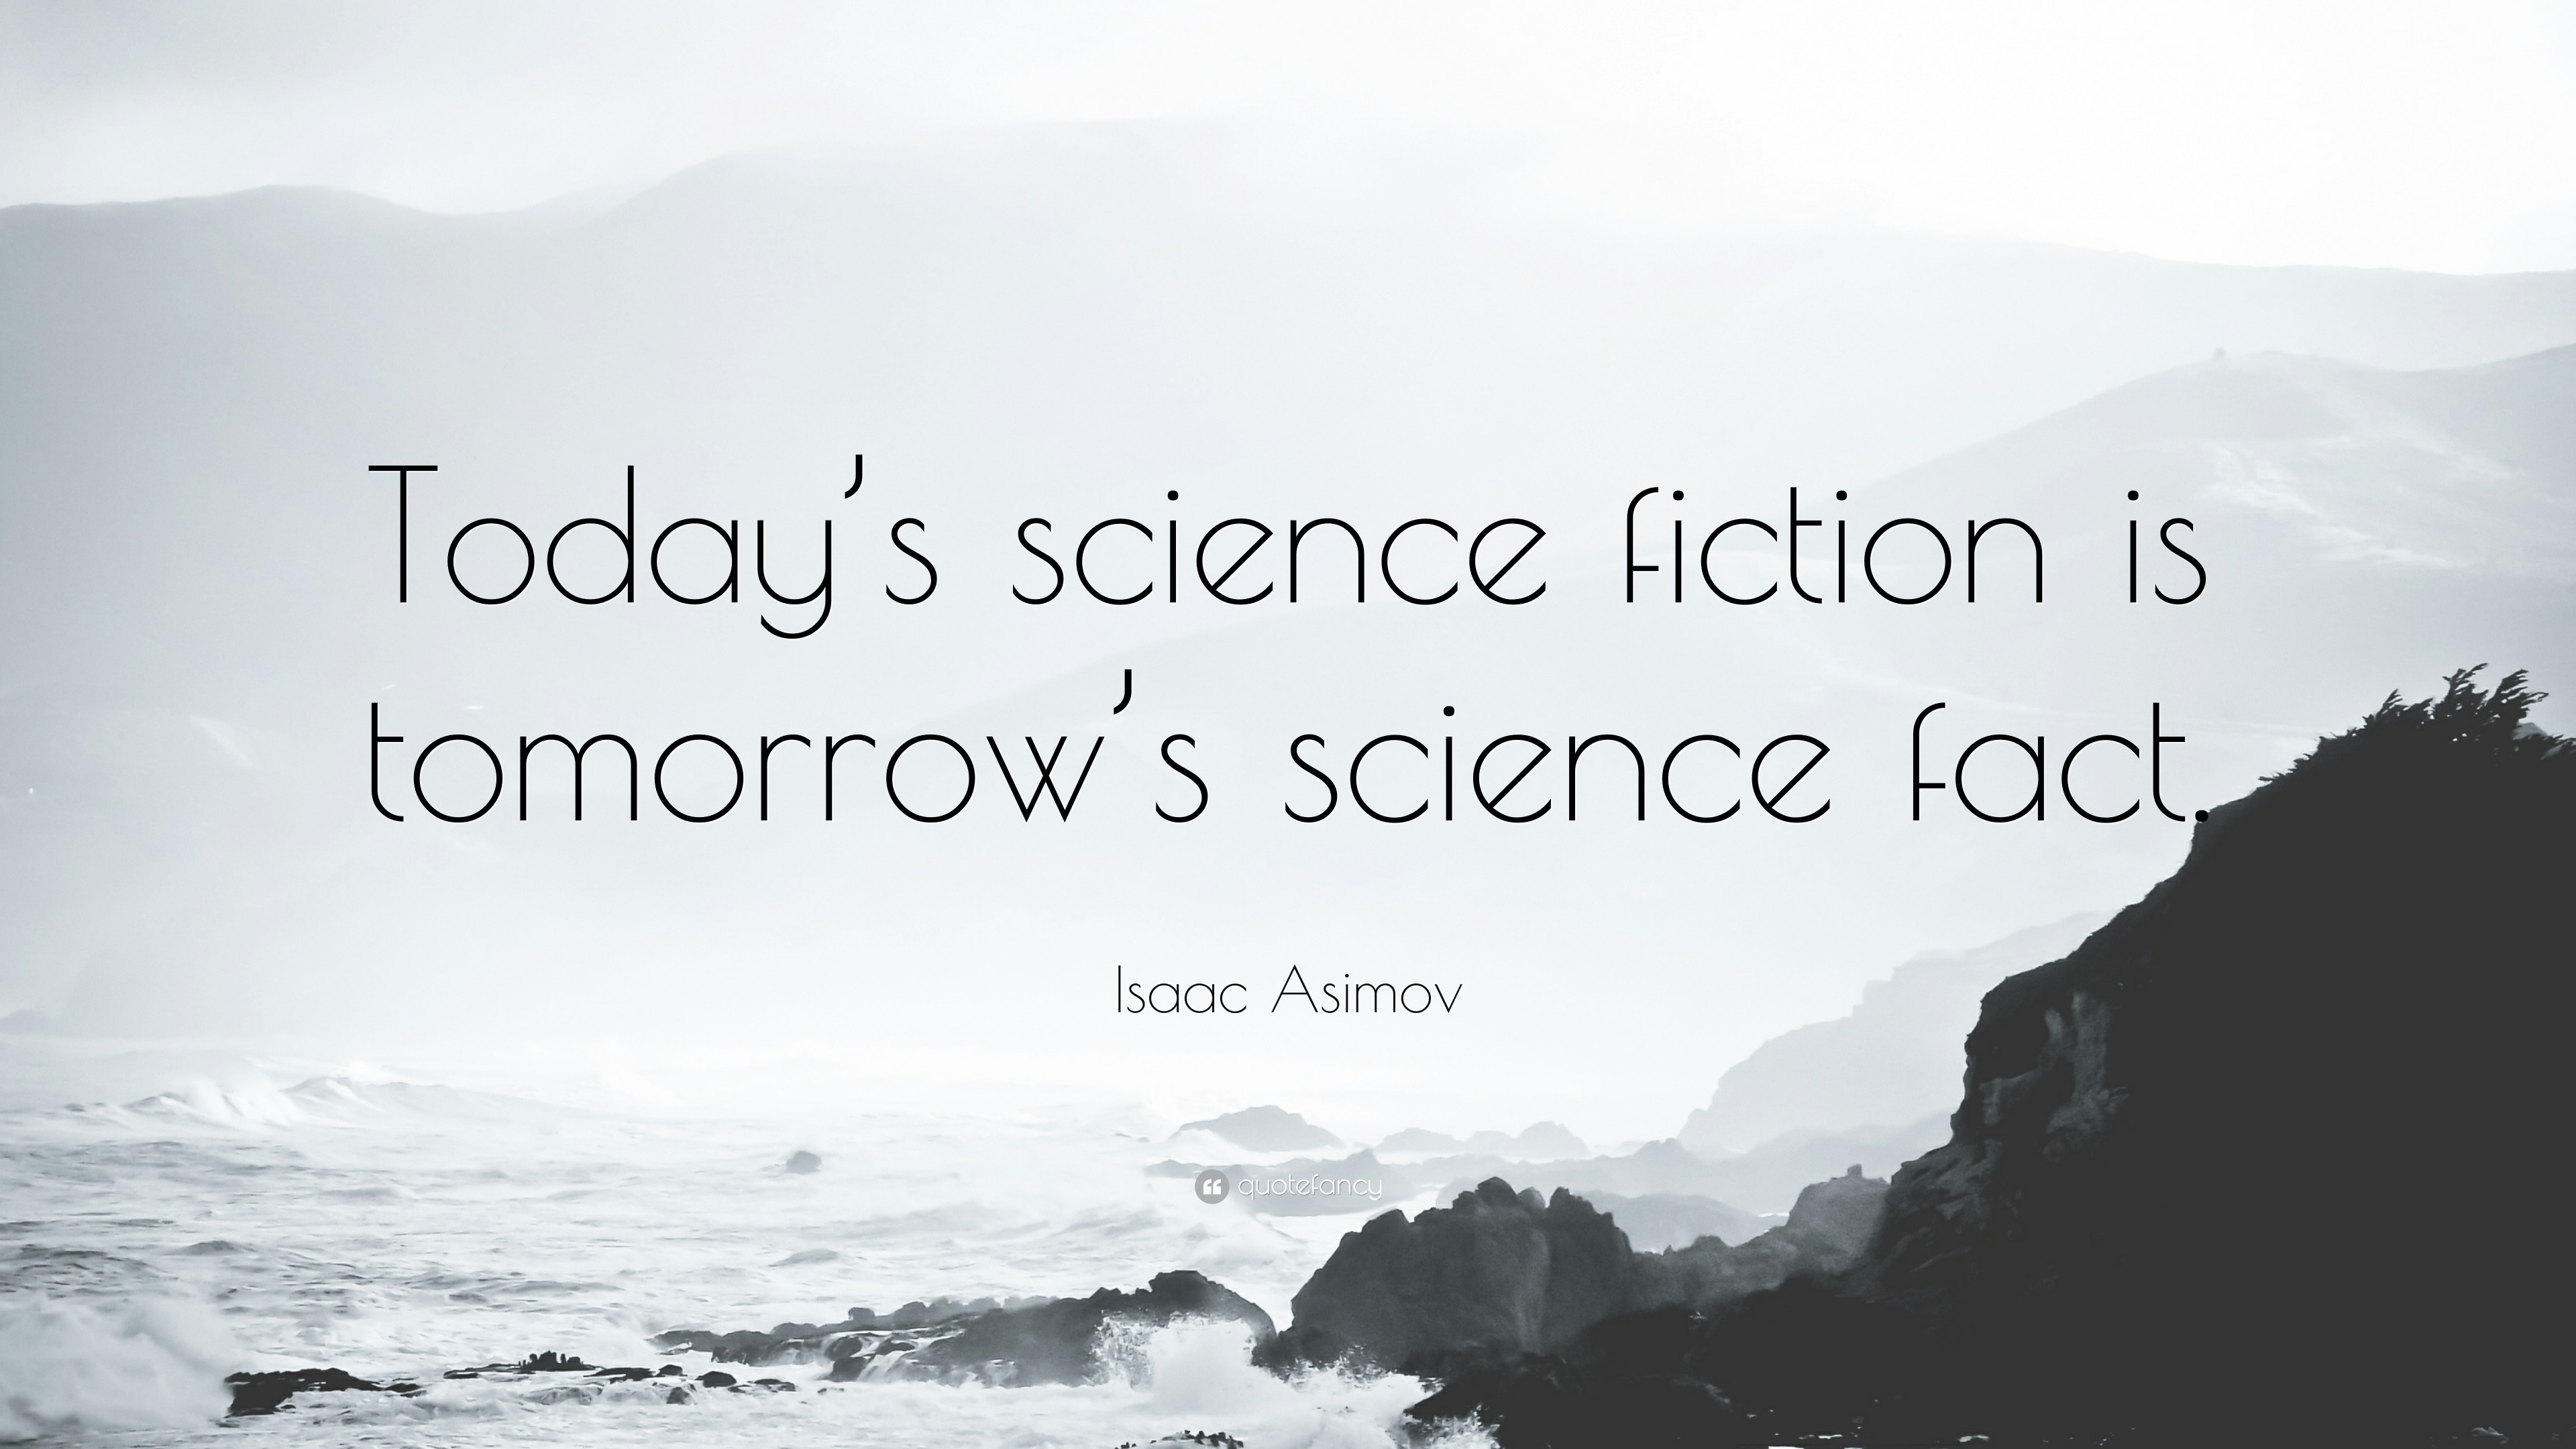 2039789 Isaac Asimov Quote Today s science fiction is tomorrow s science